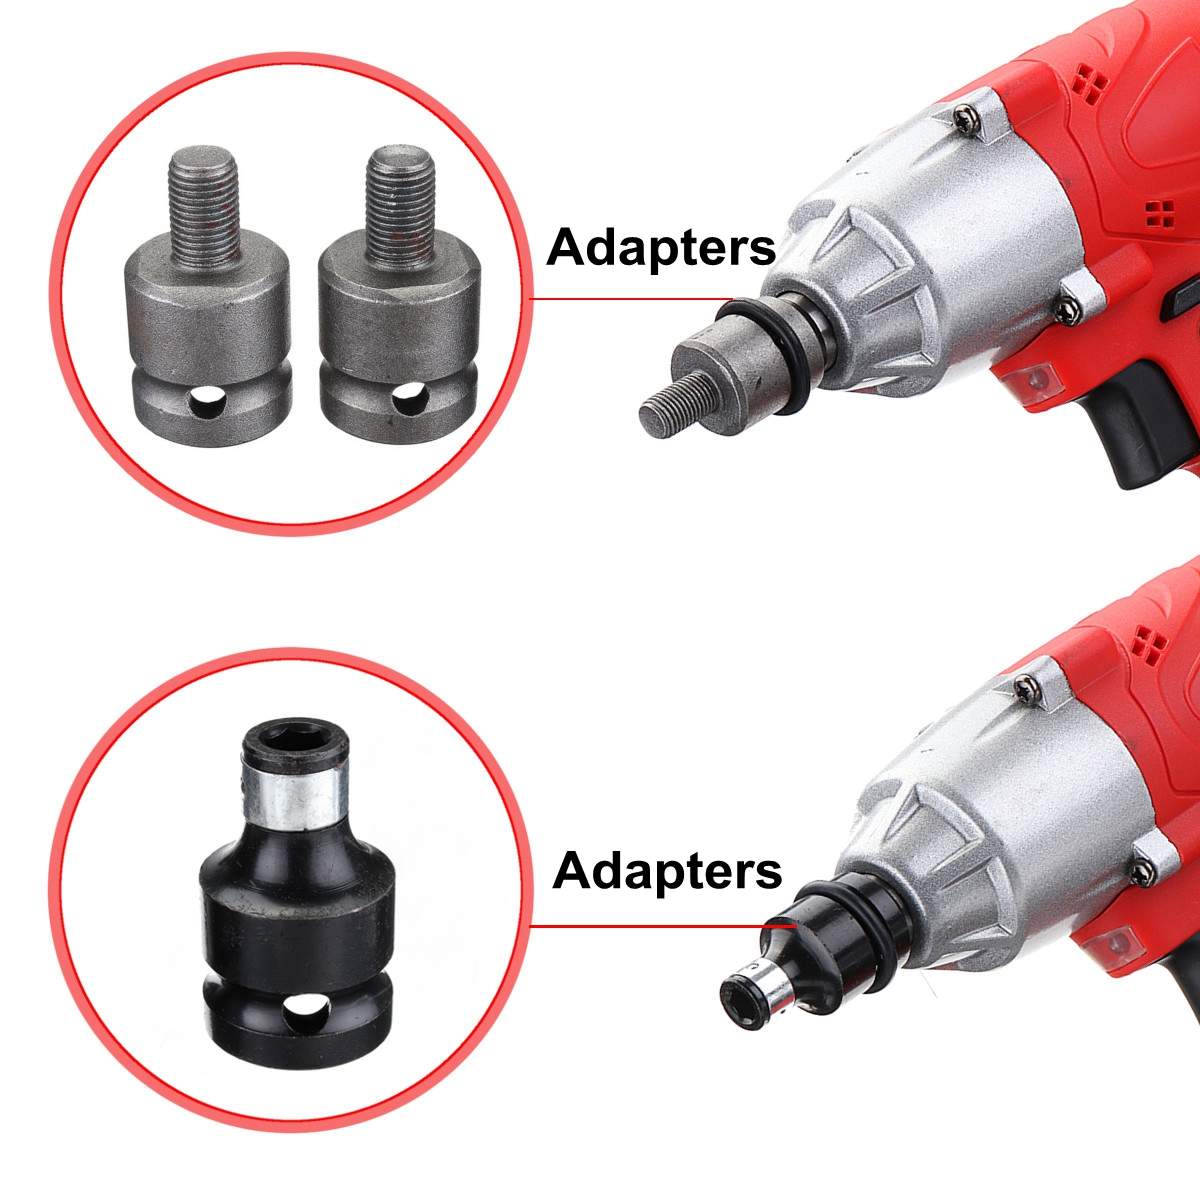 12 in 1 Electric Wrench Screwdriver hex socket head Kits set for Impact Wrench Drill